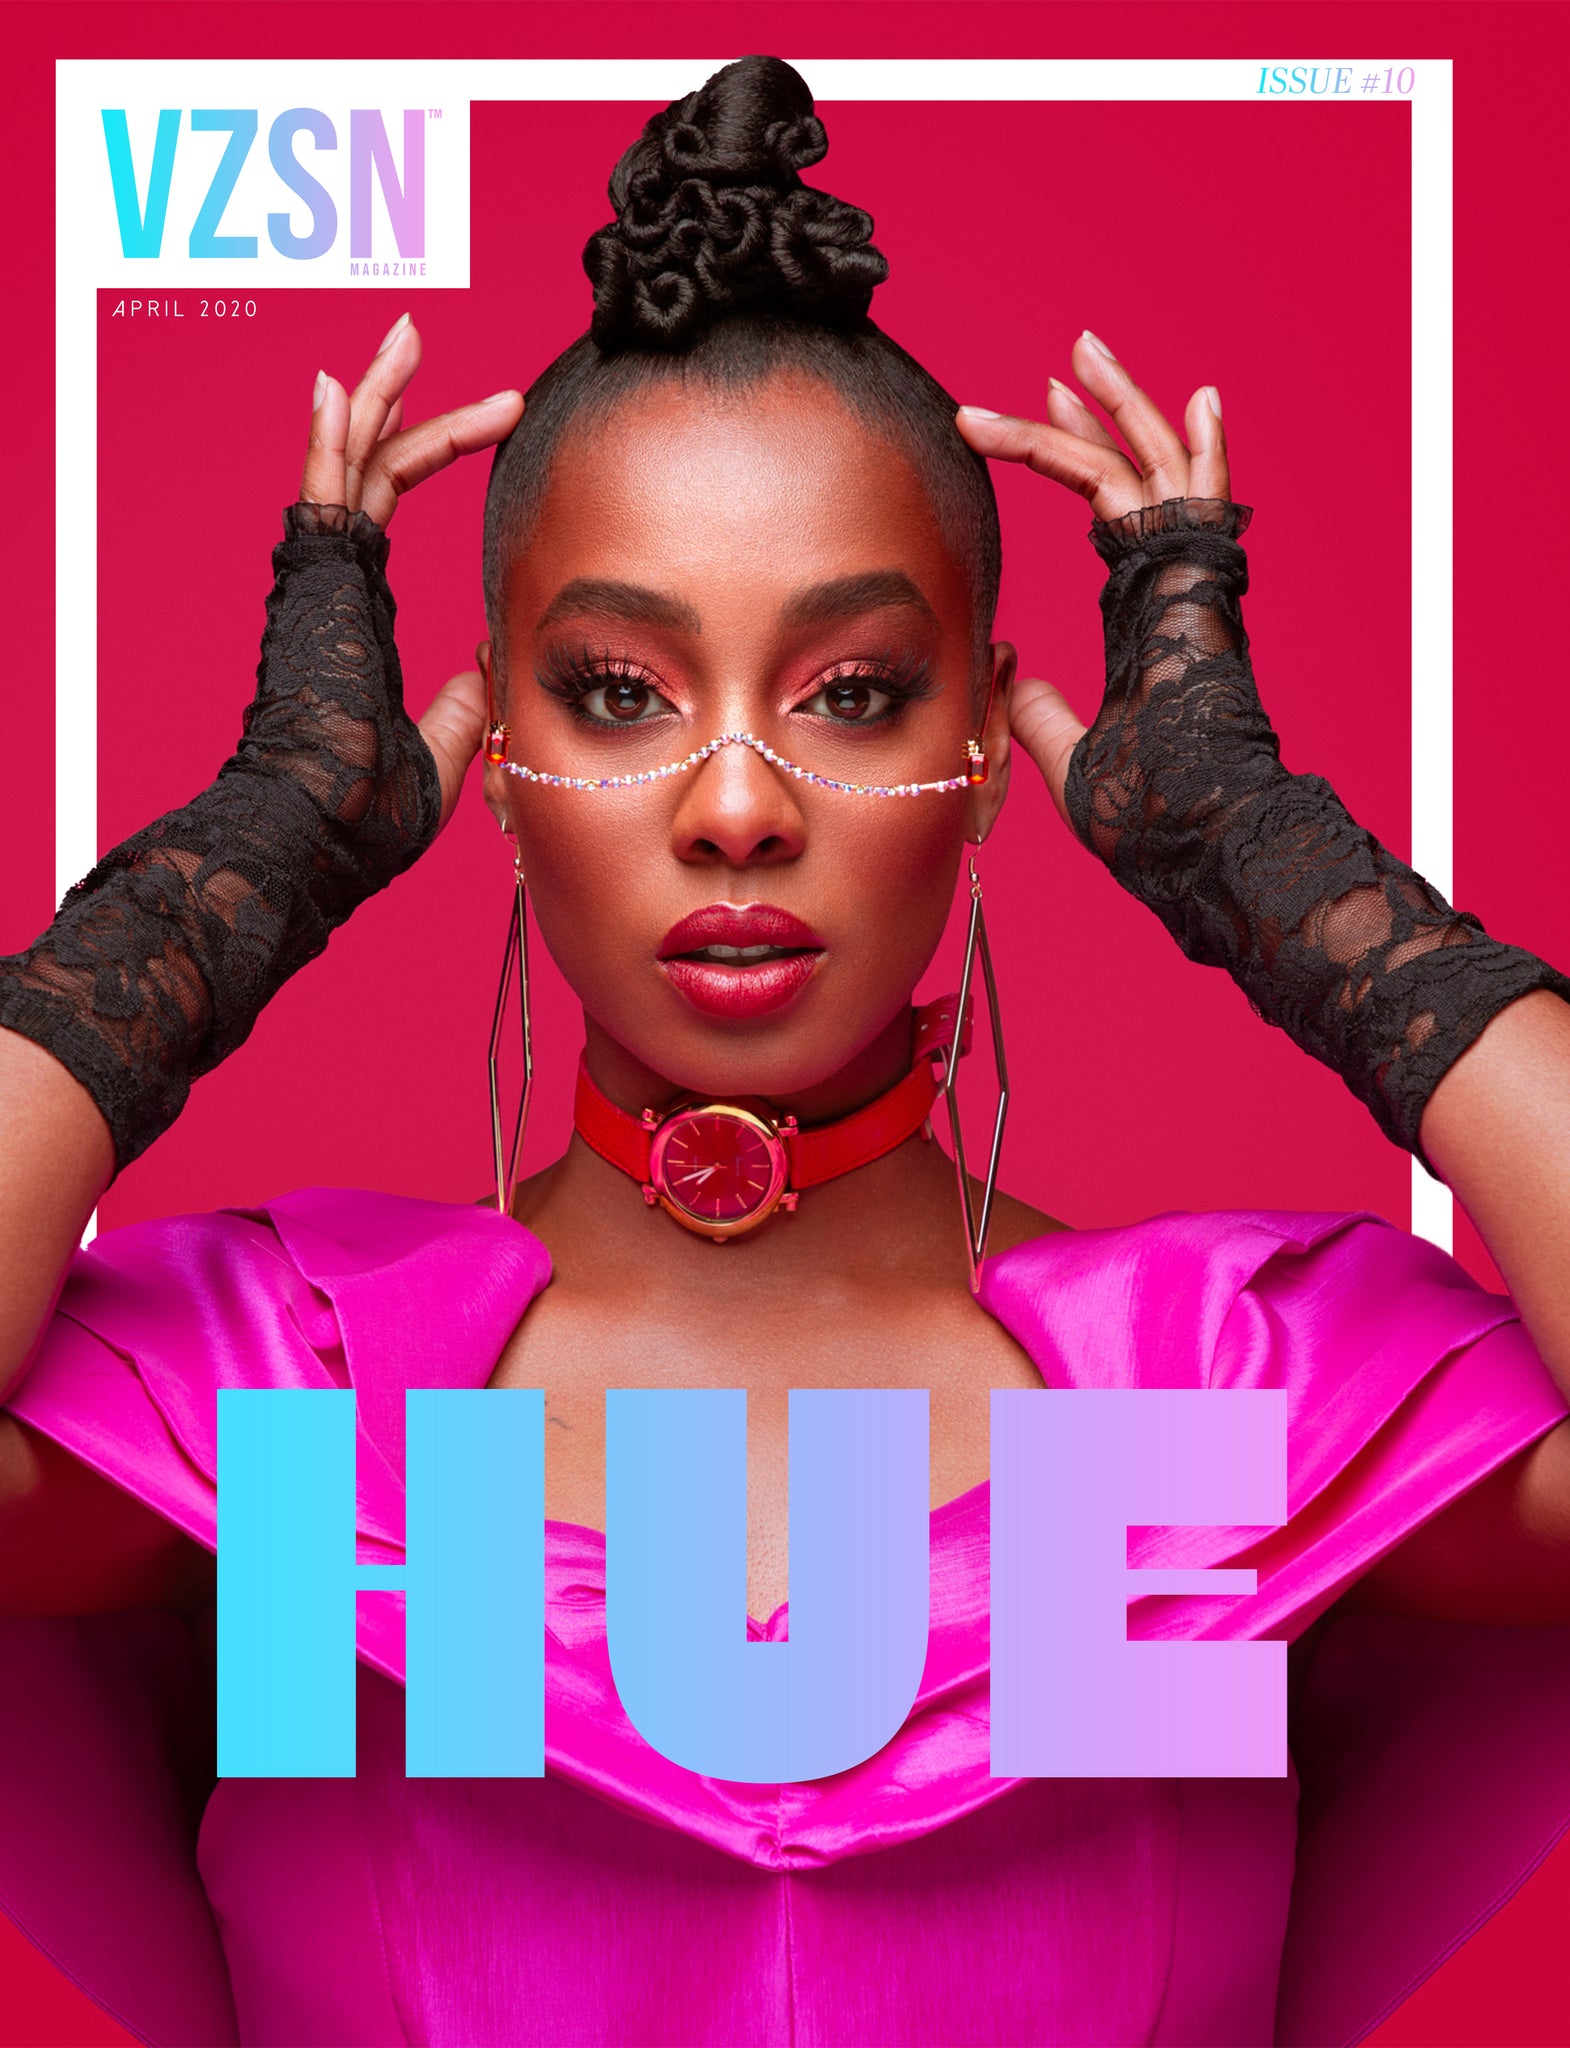 VZSN Magazine | HUE #1 (April 2020) | Vol. 3 Issue 10 (DIGITAL ONLY)